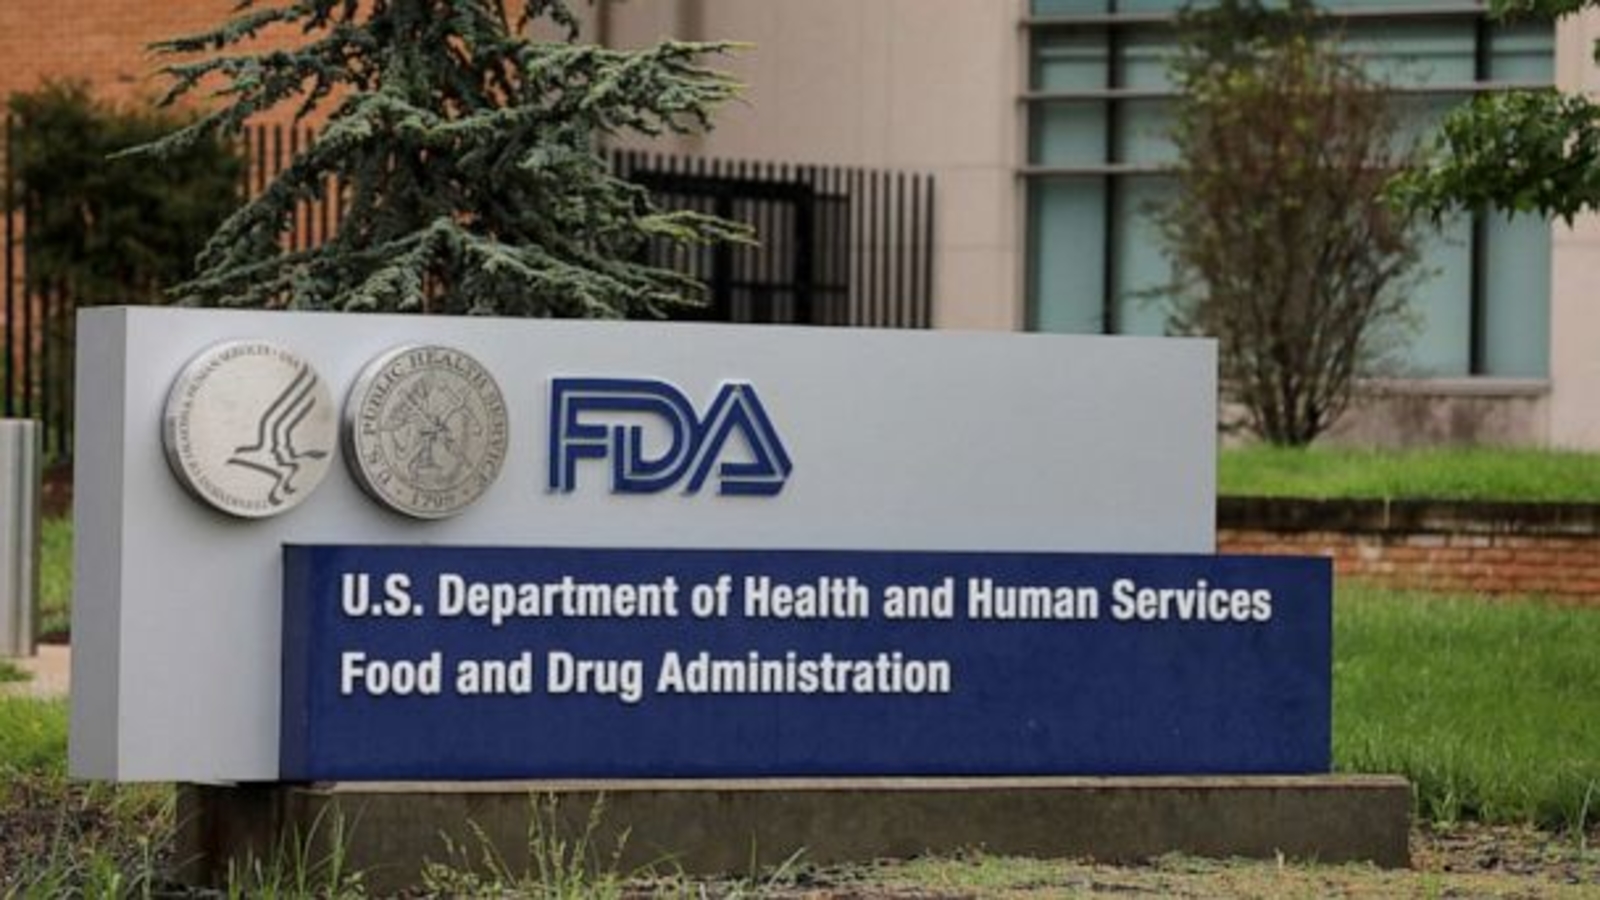 UNC-Chapel Hill, Duke to be awarded up to $50 million from the FDA for new research center